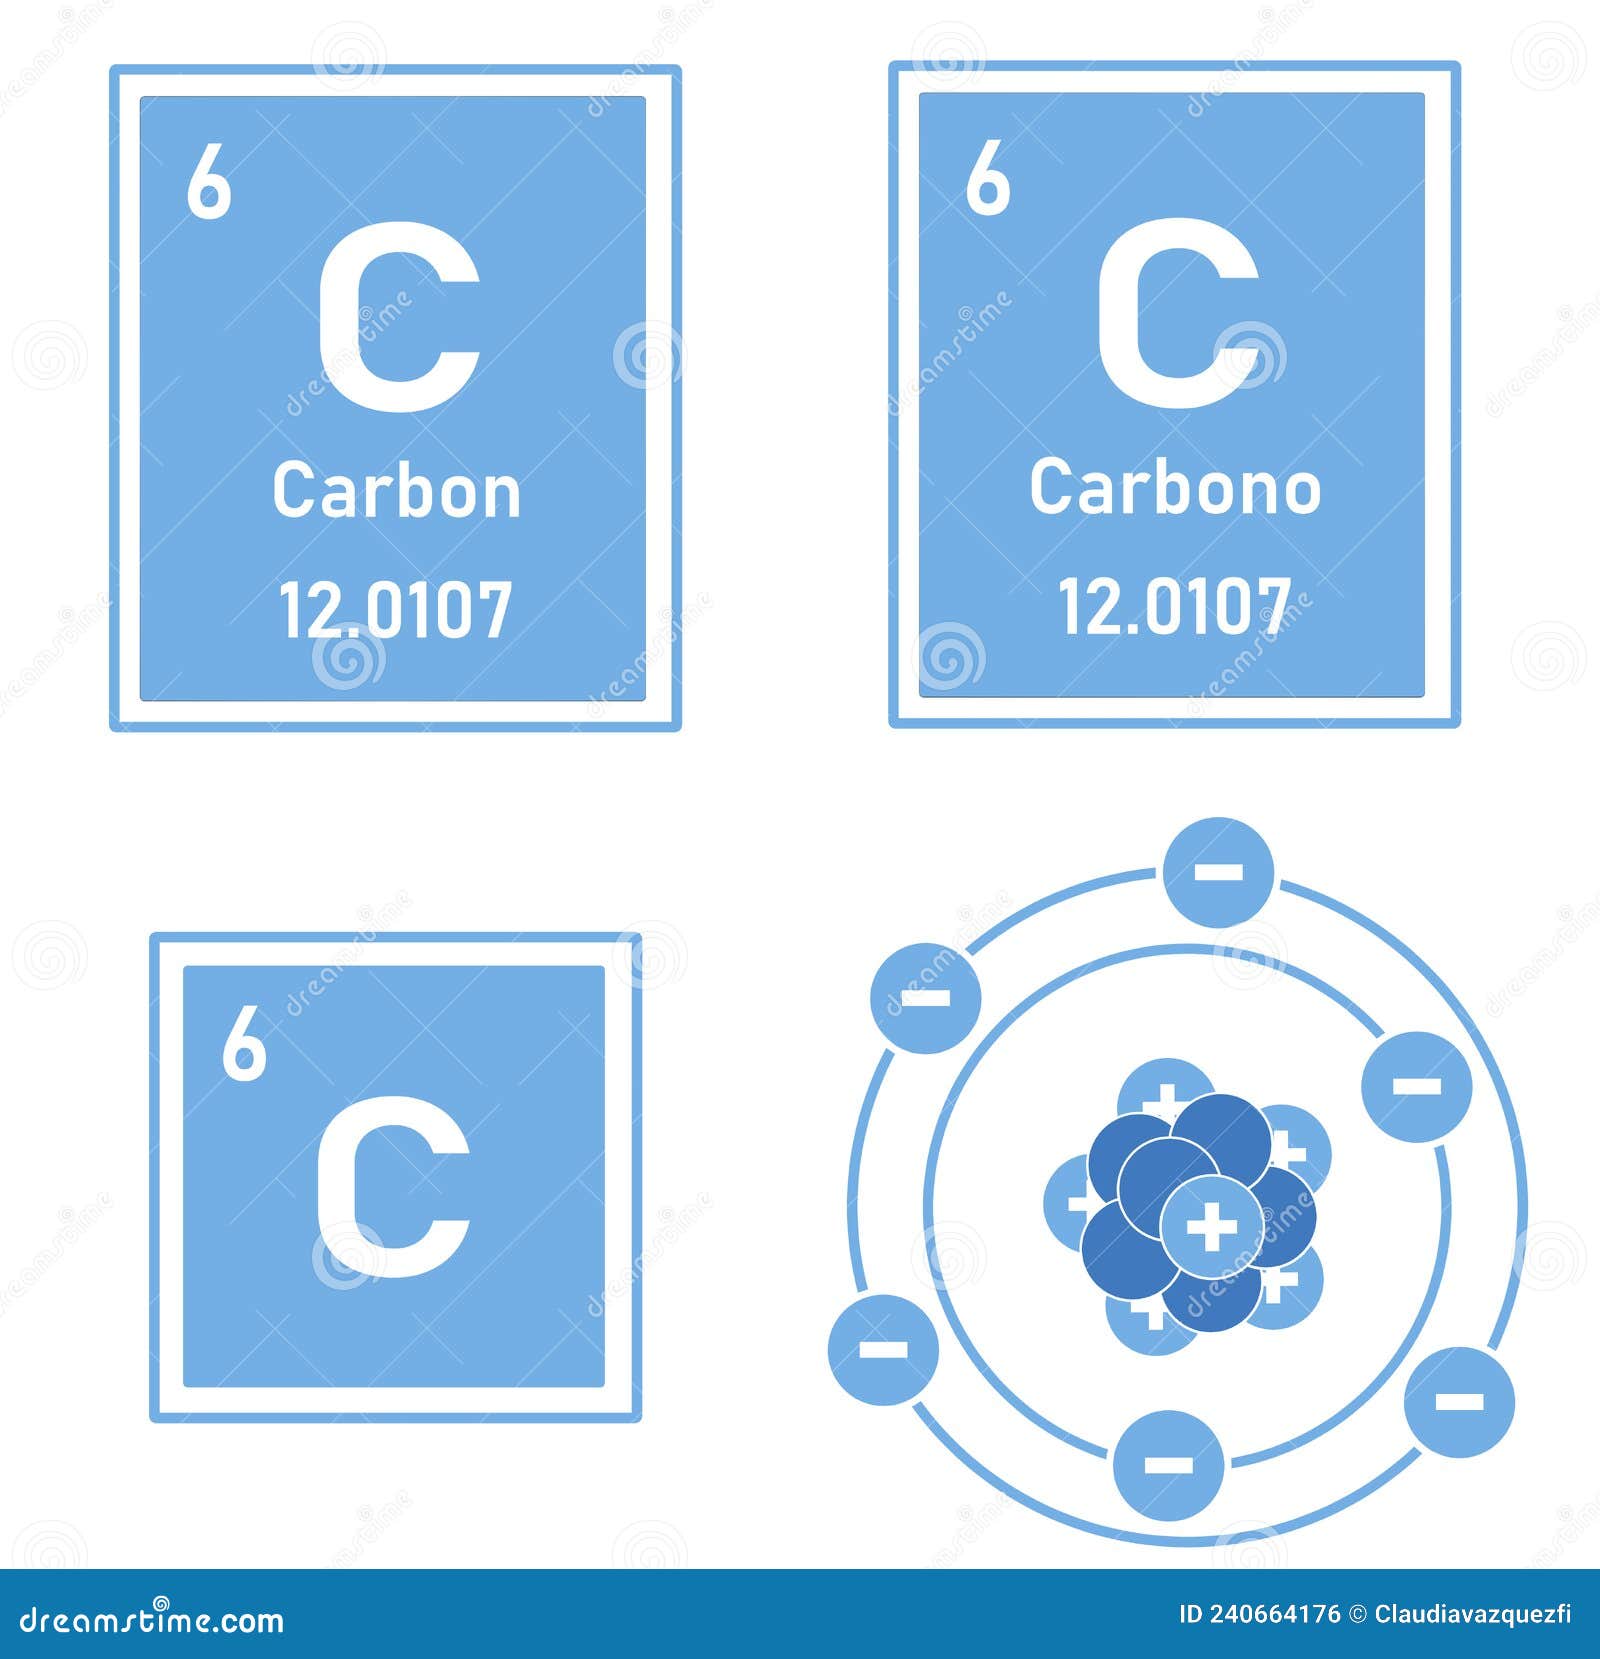 carbon icon of the periodic table